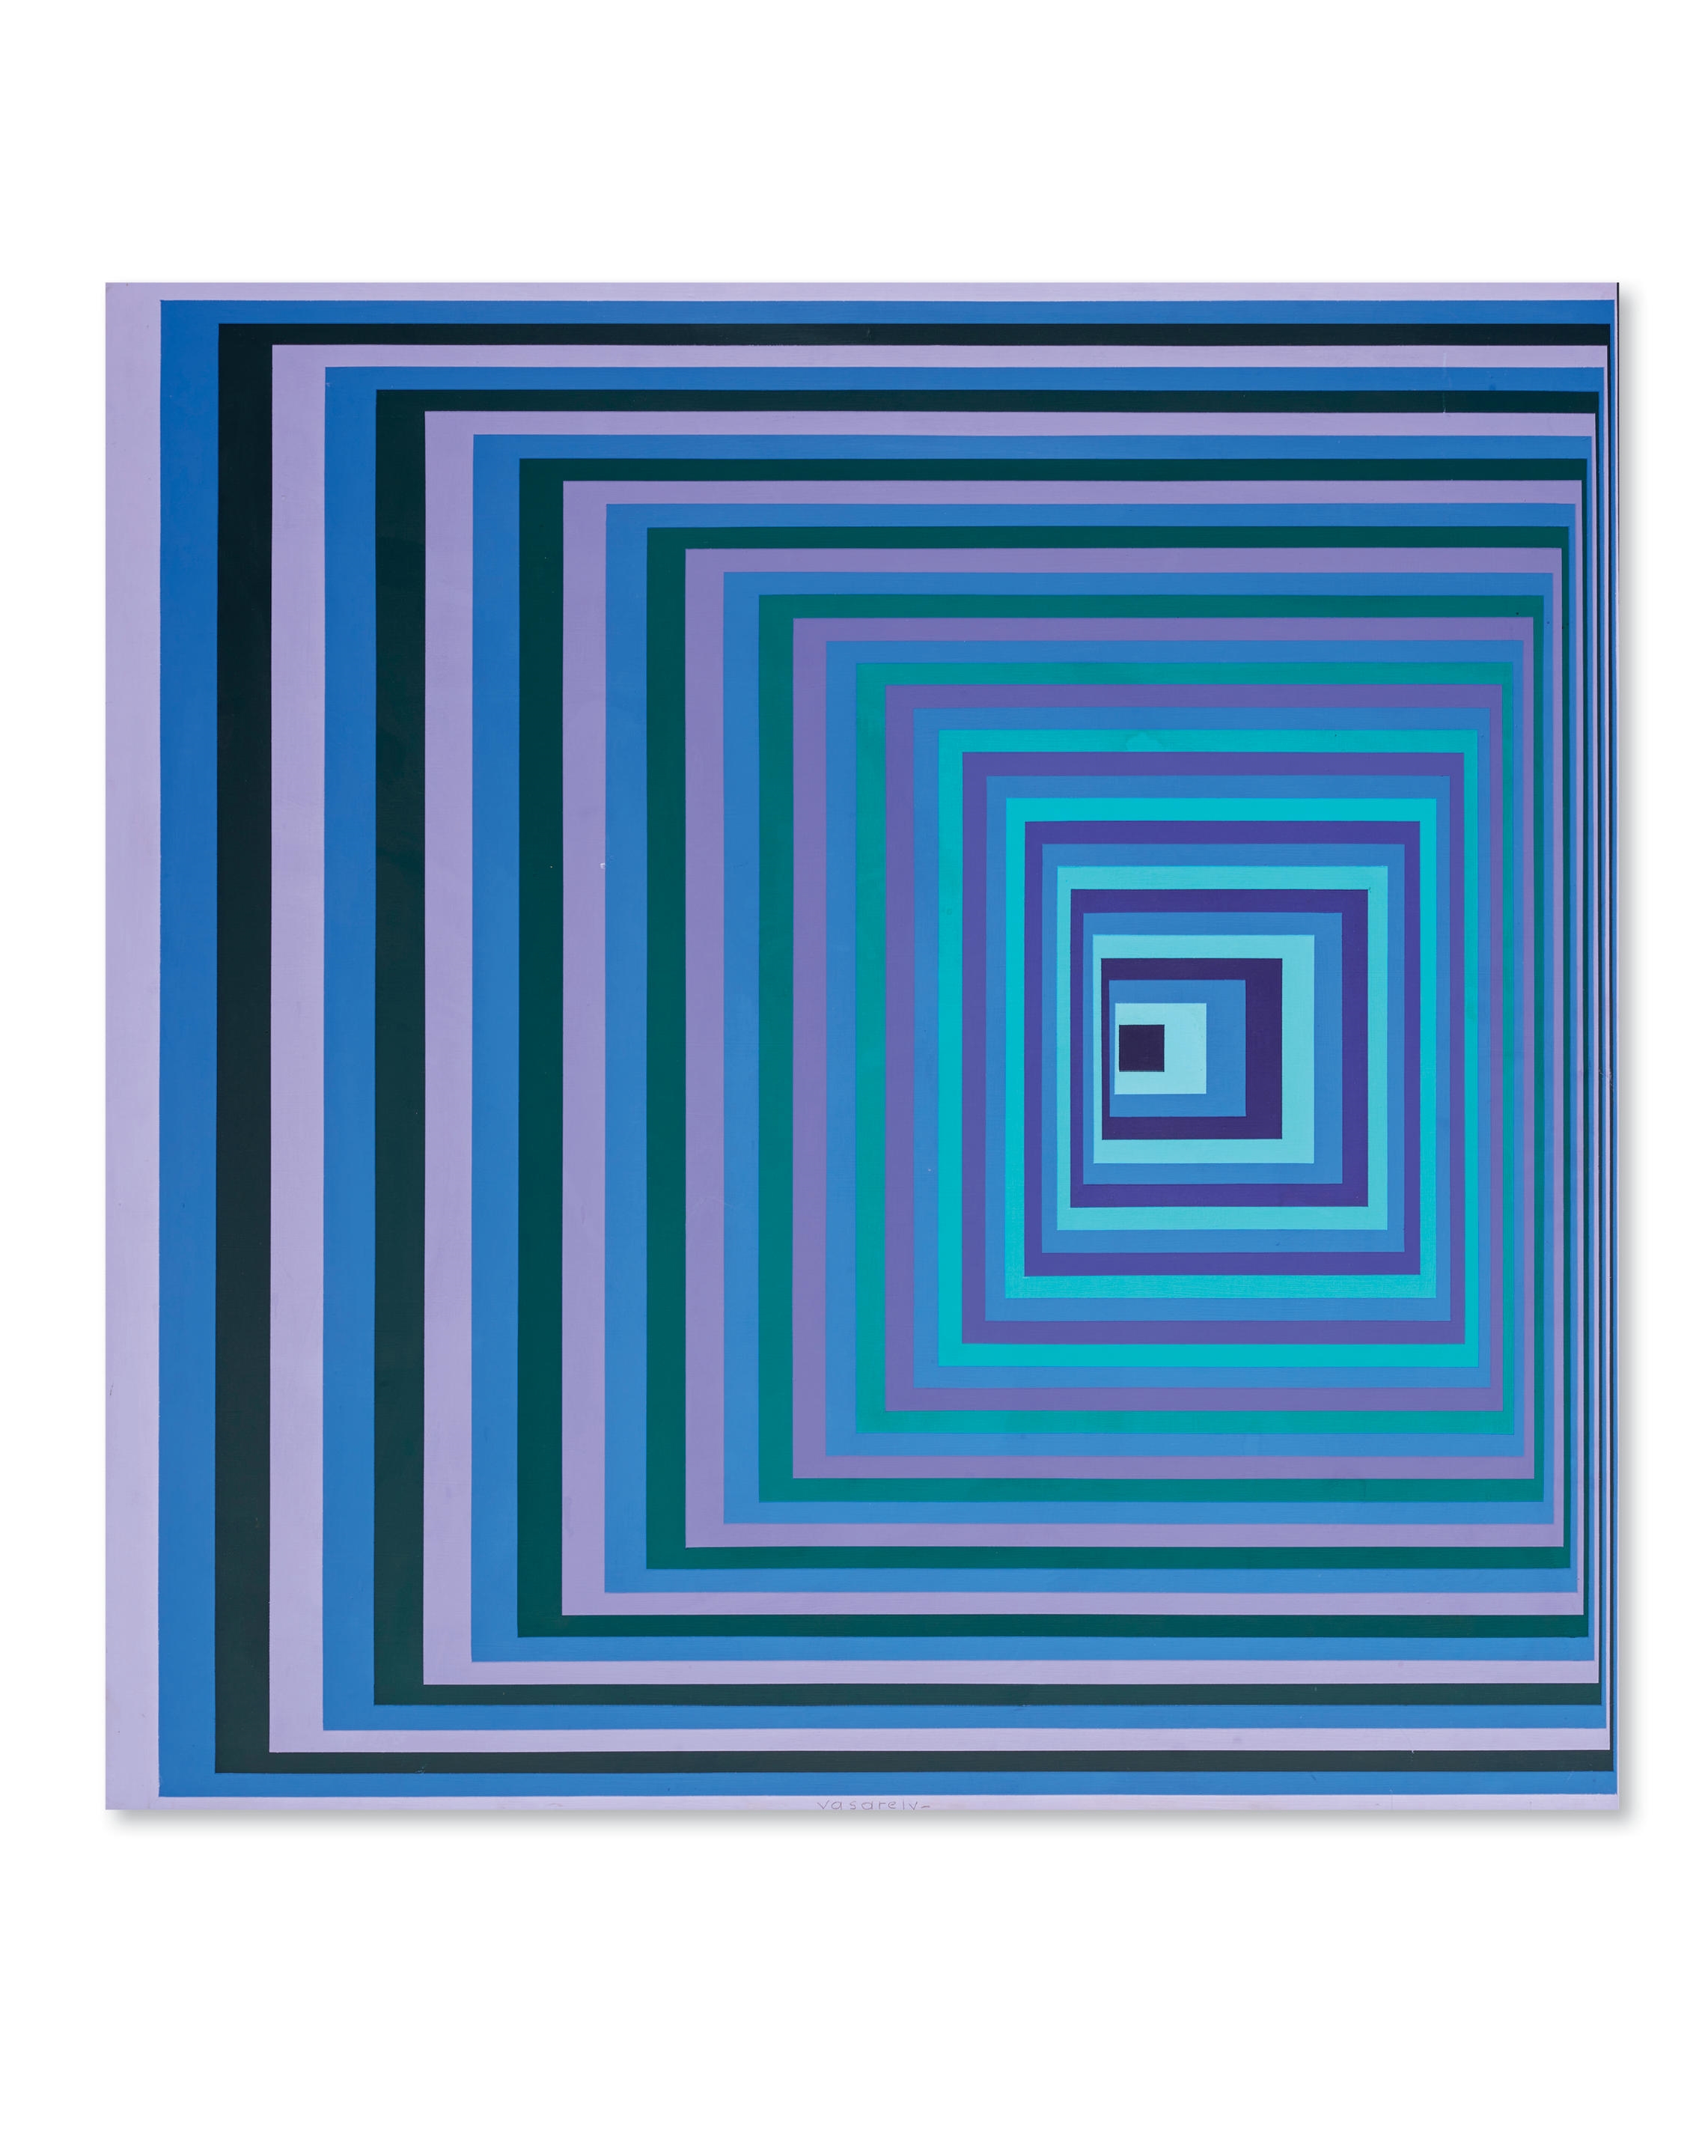 YNGA, Victor Vasarely Auction Prices Indices: LiveArt, 54% OFF